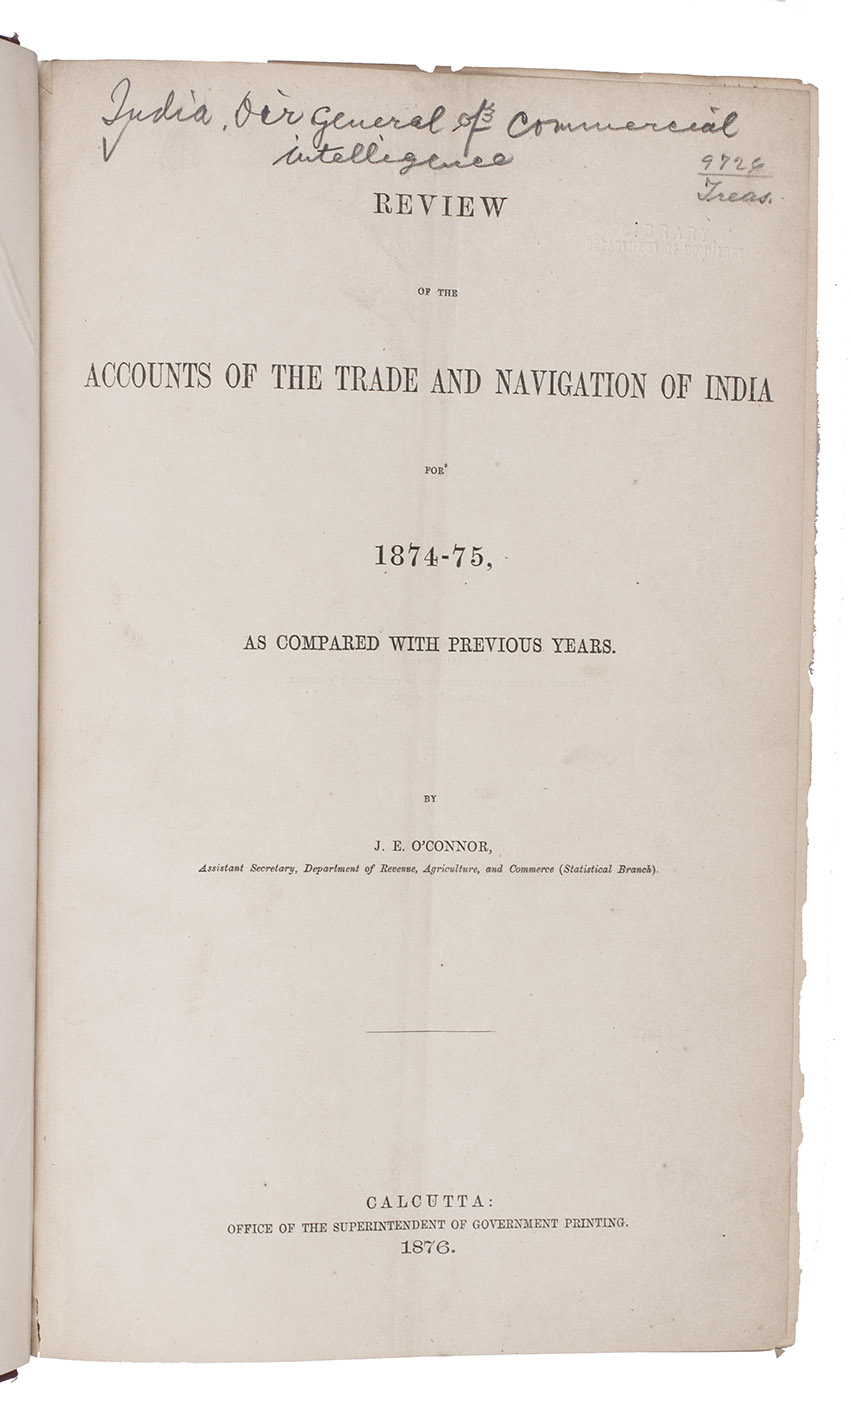 O'CONOR, James Edward. - Review of the accounts of the trade and navigation of India for 1874-75, as compared with previous years.Calcutta, Office of the superintendent of government printing, 1876.With:(2) Memorandum reviewing the accounts of the trade and navigation of British India for 1875-76. Dated the 24th February 1877. [Calcutta?], Government central press, 1877.(3) Review of the trade of British India for the official year 1876-77.Calcutta, 25 October1877.(4) Review of the trade of British India with other countries, for the official year 1878-1879.[Calcutta?], Government central press, 1879.(5) Review of the maritime trade of British India with other countries for the official year 1879-80.Calcutta, office of the superintendent of government printing, 1880.(6) Review of the maritime trade of British India with other countries for the official year 1880-81.Calcutta, office of the superintendent of government printing, 1881.(7) Review of the maritime trade of British India with other countries for the official year 1881-82.Calcutta, office of the superintendent of government printing, 1882.(8) Review of the accounts of the sea-borne foreign trade of British India for the official year ending 31st March 1883.Simla, Government central branch press, 1883.(9) Review of the accounts of the sea-borne foreign trade of British India for the official year ending 31st March 1884.Simla, Government central branch press, 1884.9 parts in 1 volume. Folio. Near contemporary red cloth.